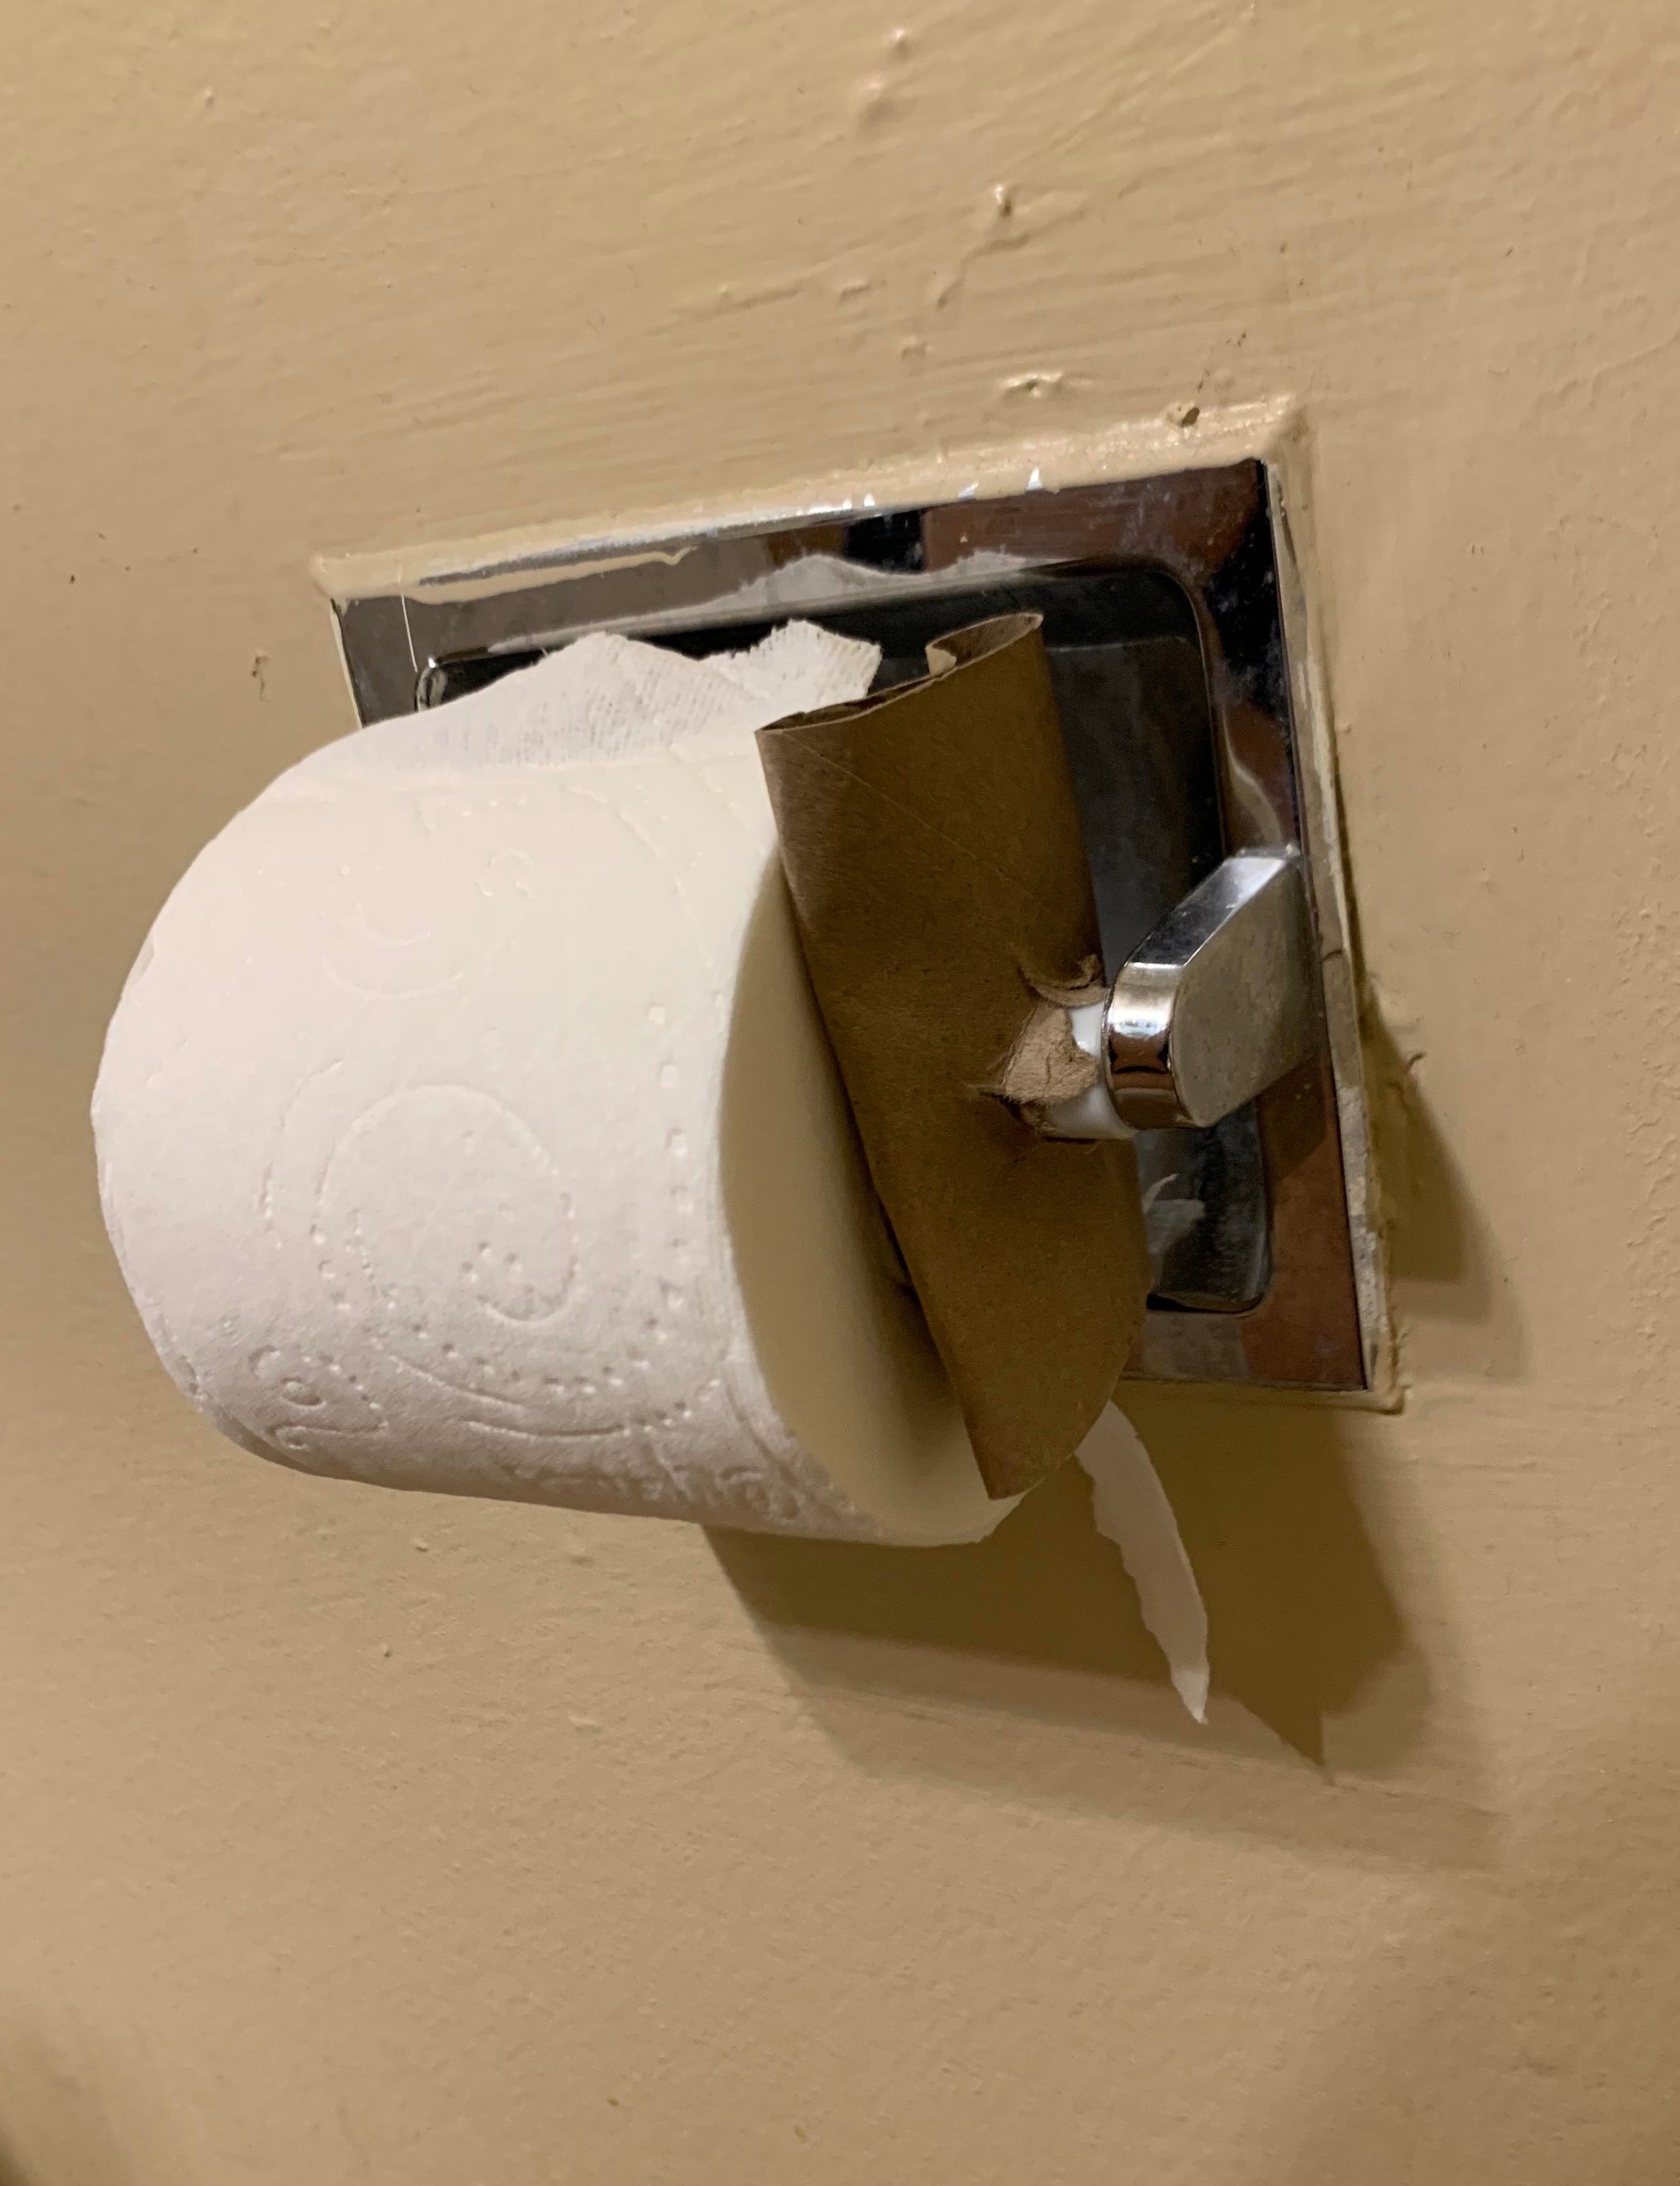 Toilet paper roll incorrectly placed with paper end against the wall